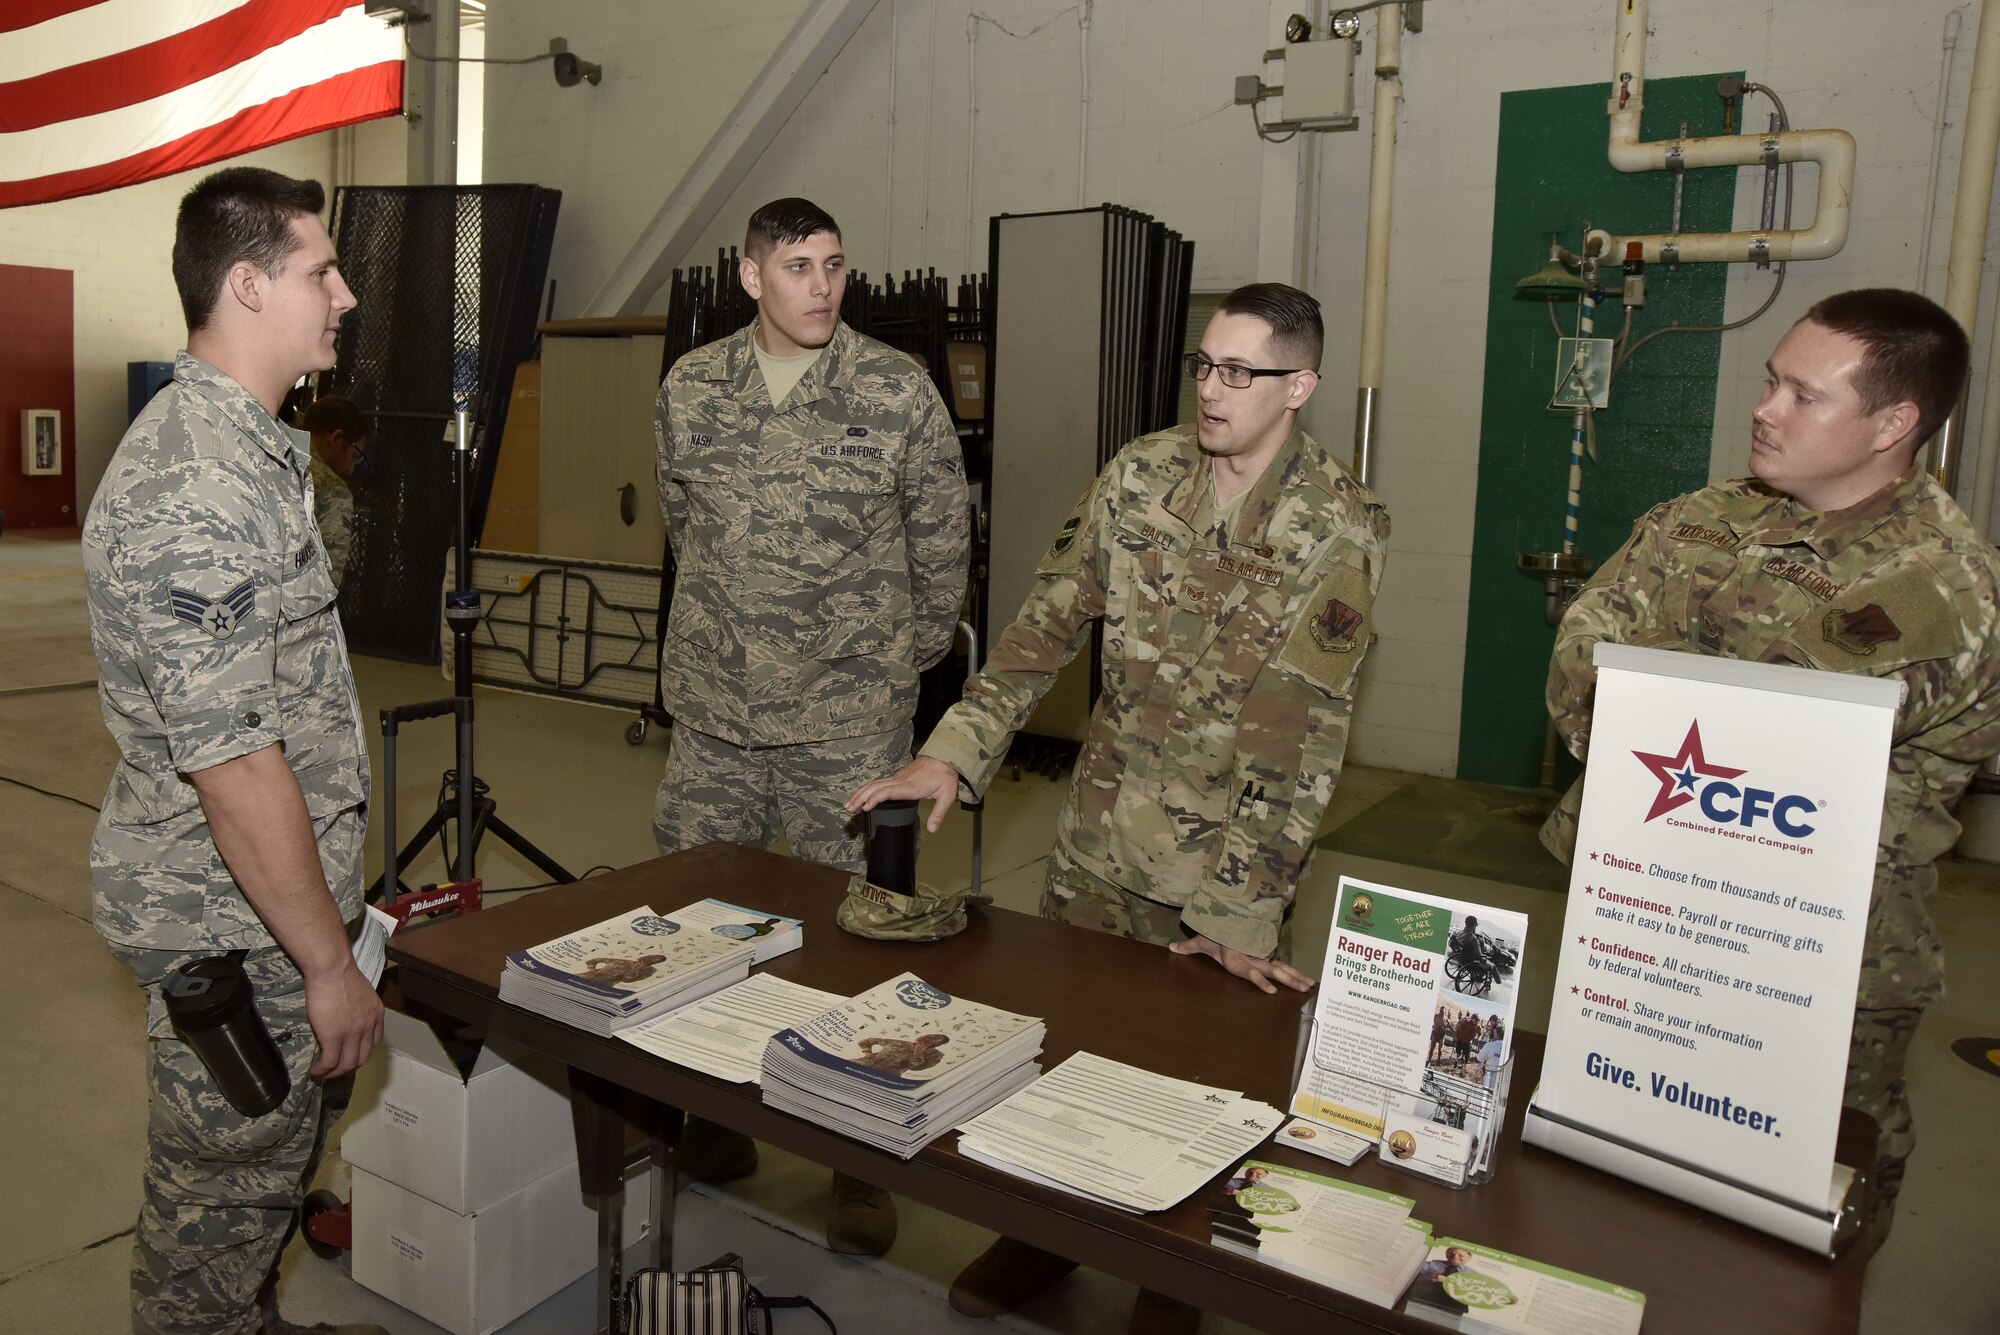 A photo of an Airman speaking to Combined Federal Campaign group representatives at a CFC booth